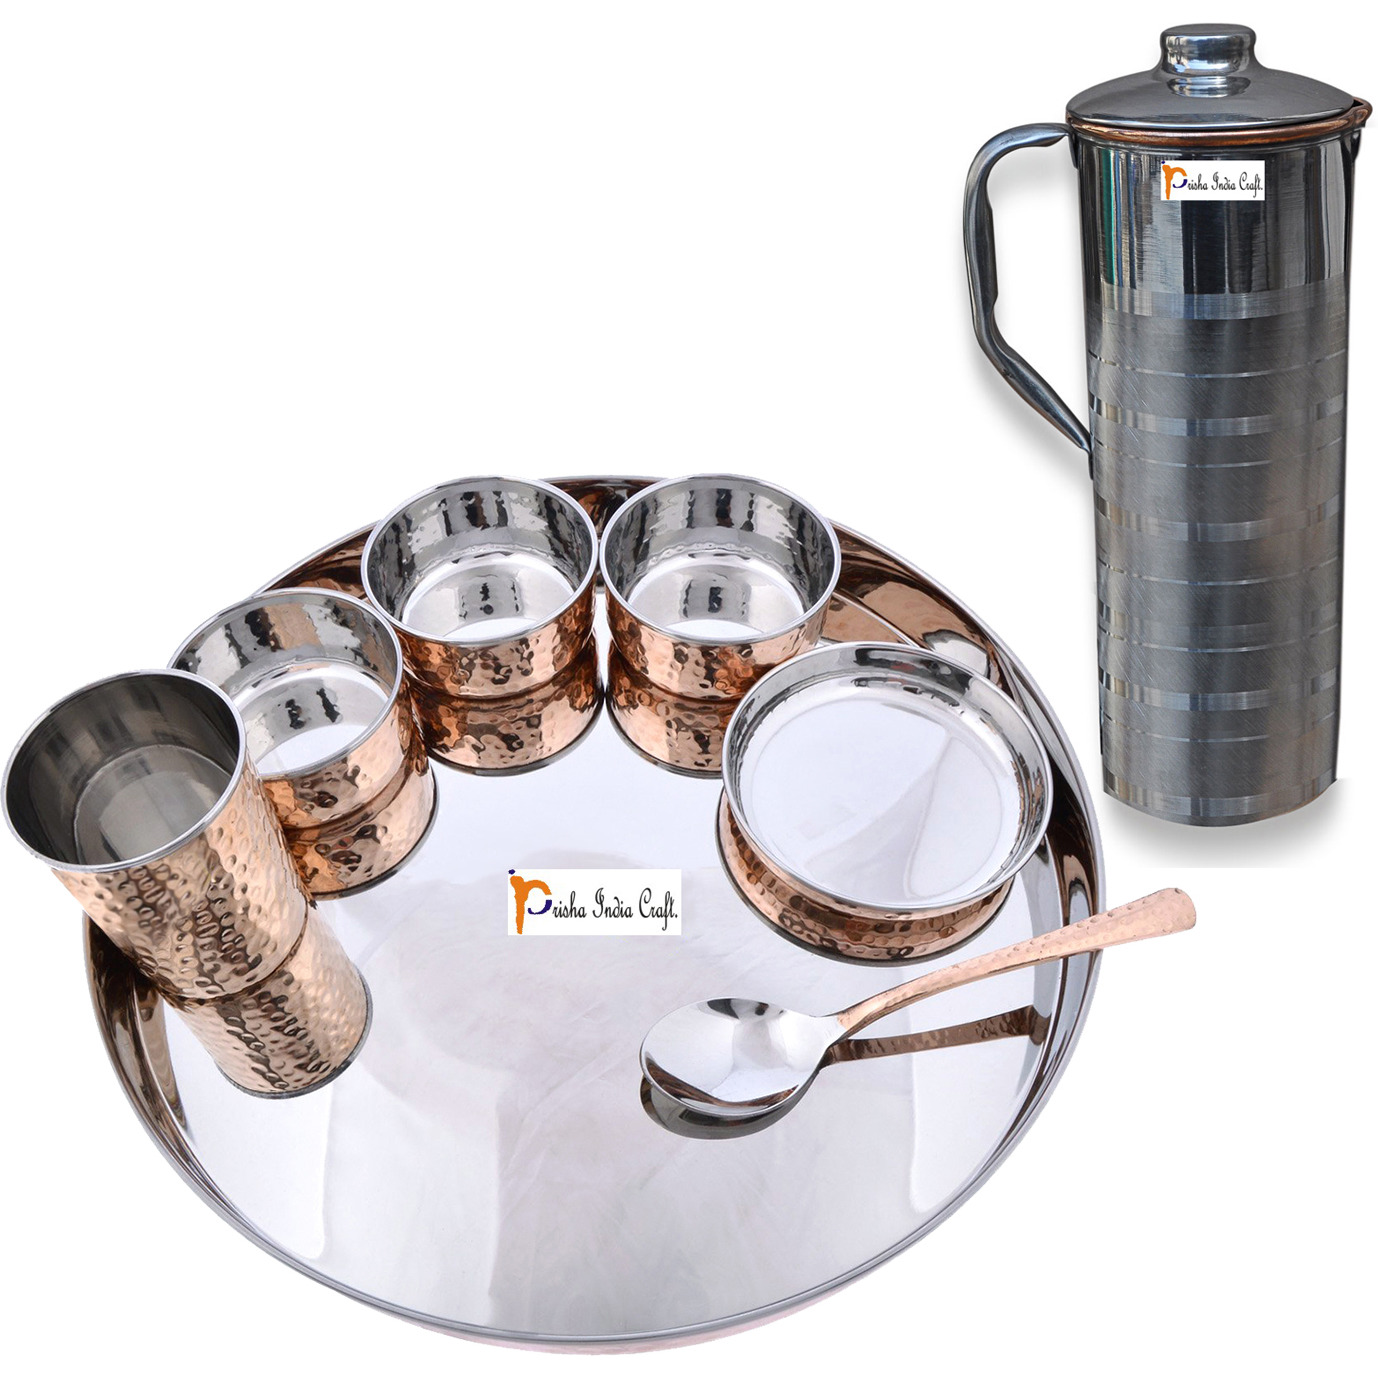 Prisha India Craft B. Dinnerware Traditional Stainless Steel Copper Dinner Set of Thali Plate, Bowls, Glass and Spoon, Dia 13  With 1 Luxury Style Stainless Steel Copper Pitcher Jug - Christmas Gift